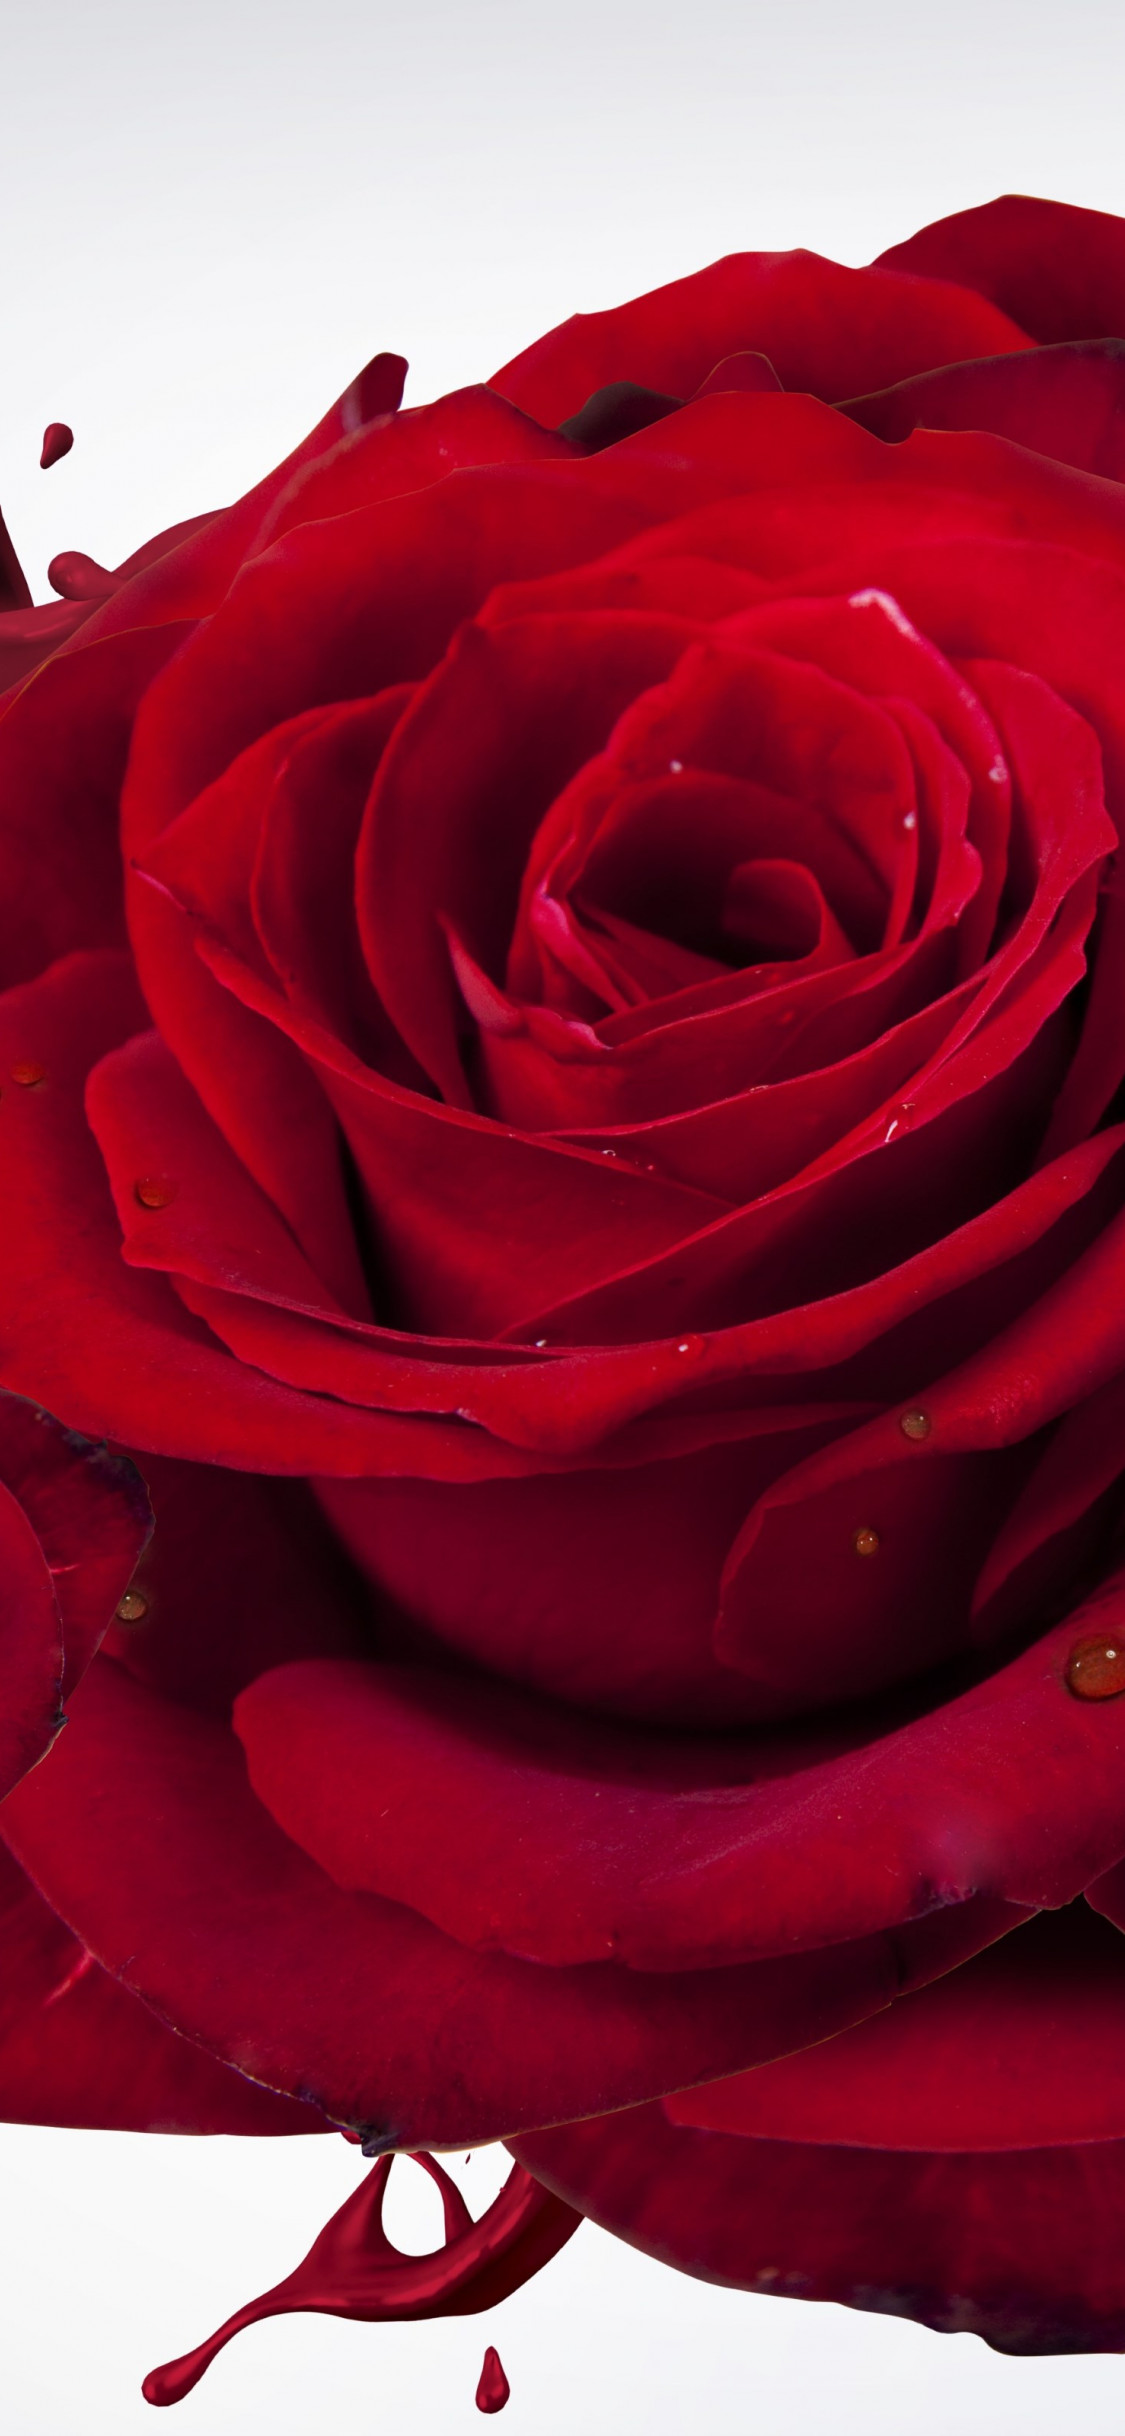 The most beautiful red roses wallpaper 1125x2436